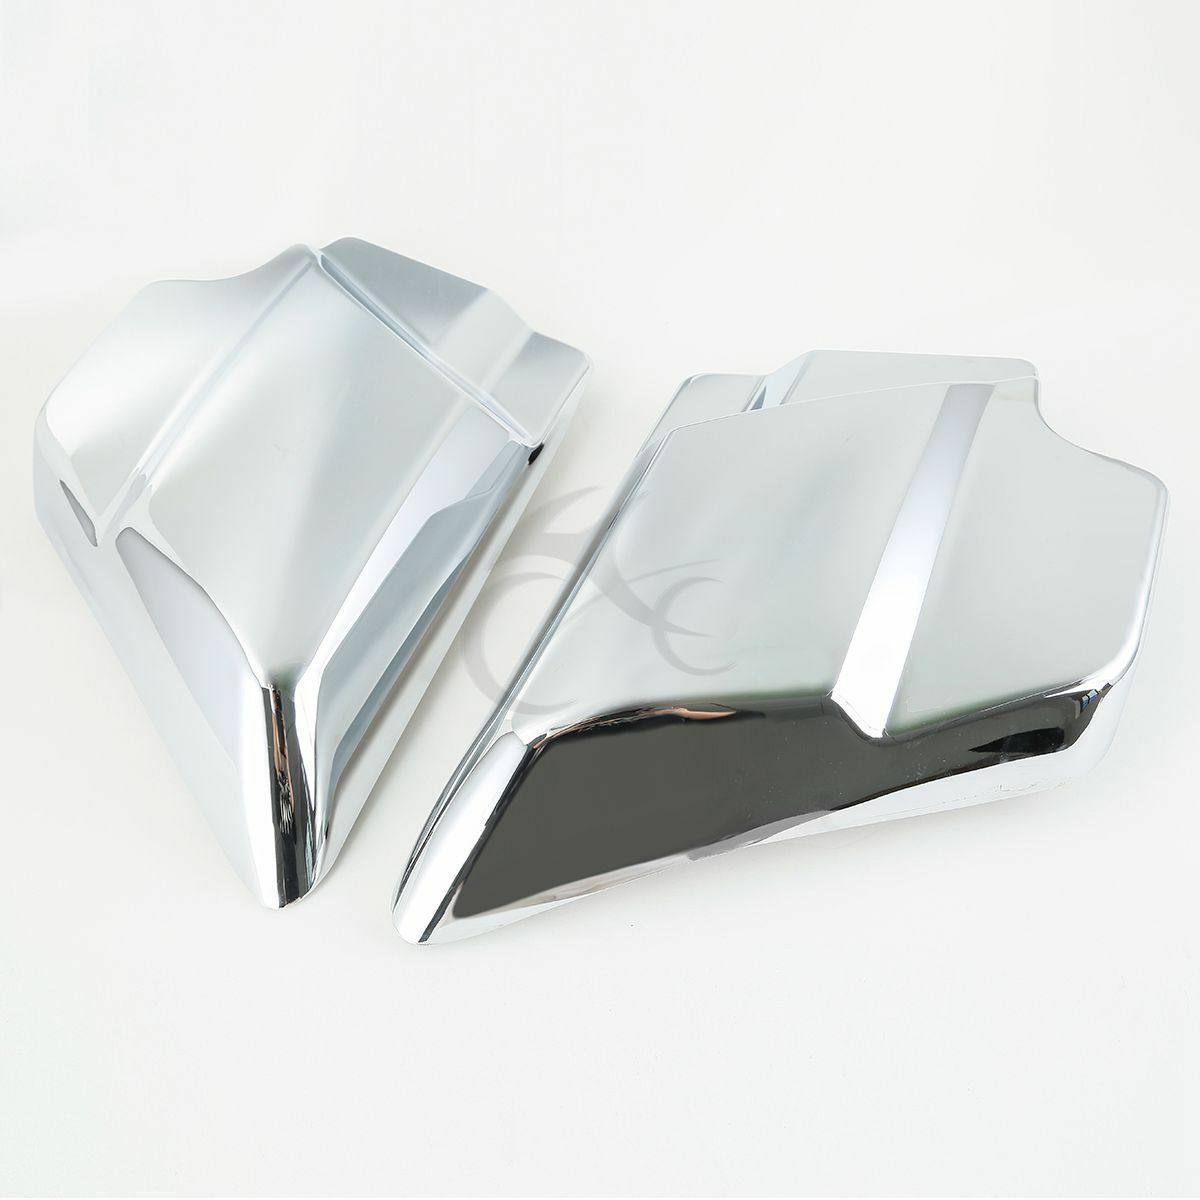 Side Cover Panel Fairing Fit For Harley Touring Street Electra Glide 2009-2021 - Moto Life Products